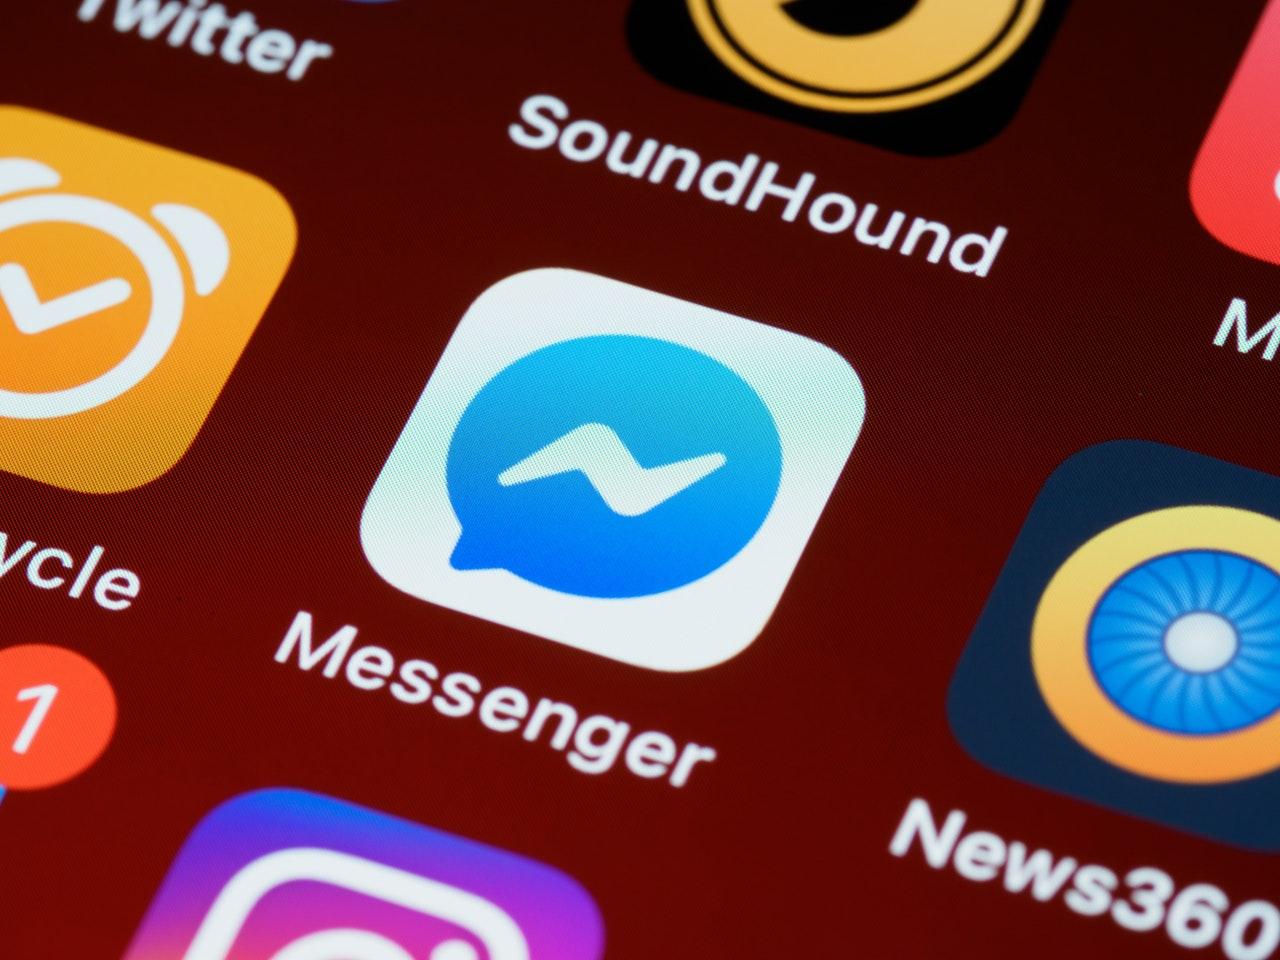 The number of audio or video calls made on Messenger has surged since 2016 to more than 150 million daily. Photo: Pexels